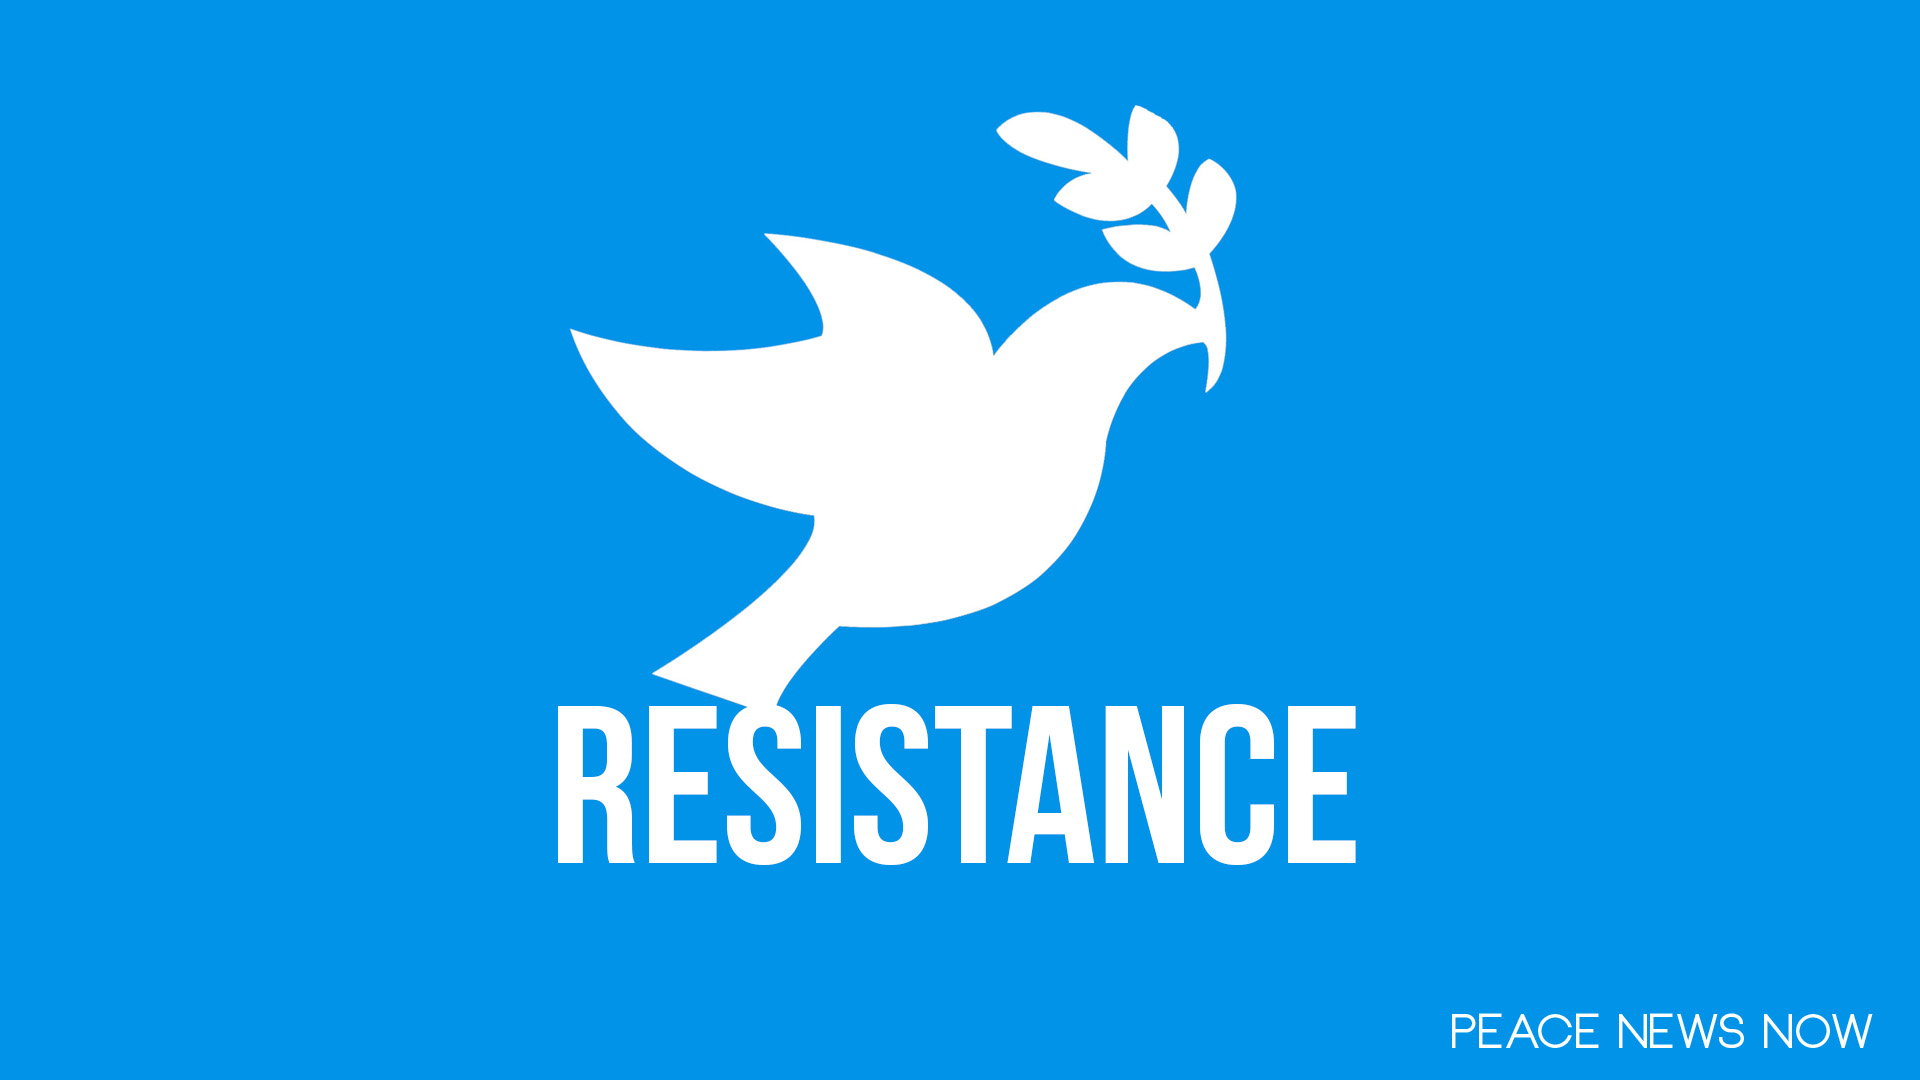 PNN #125 5 Different Models of Peaceful Resistance (from this week)